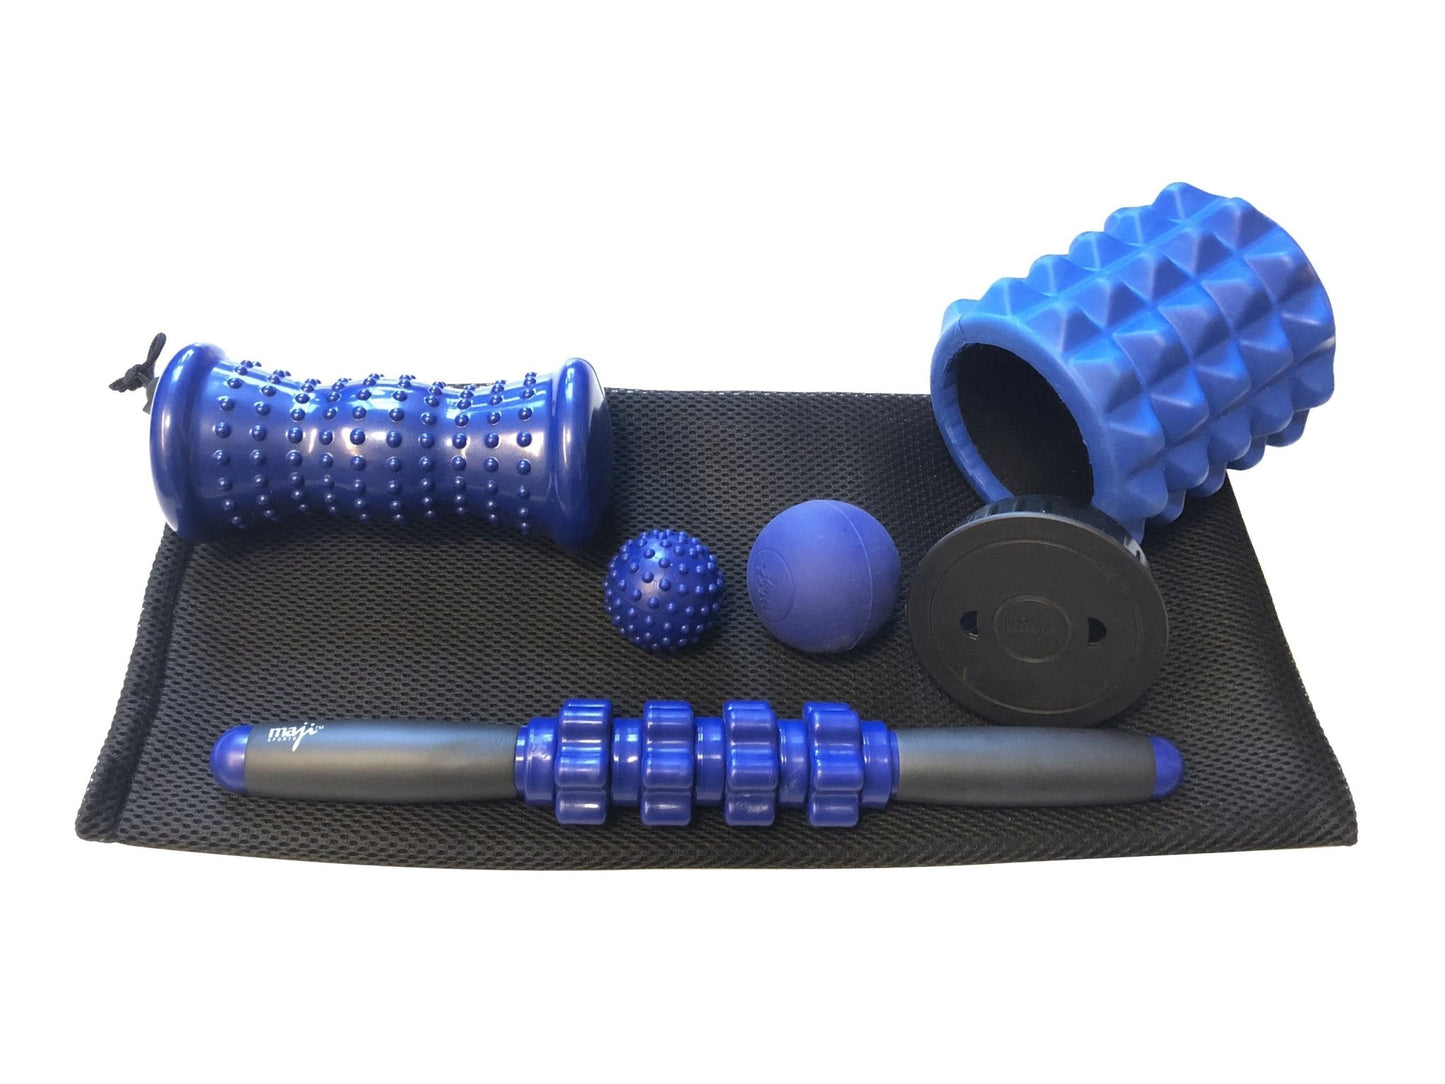 Home Muscle Massage Bundle-Gains Everyday